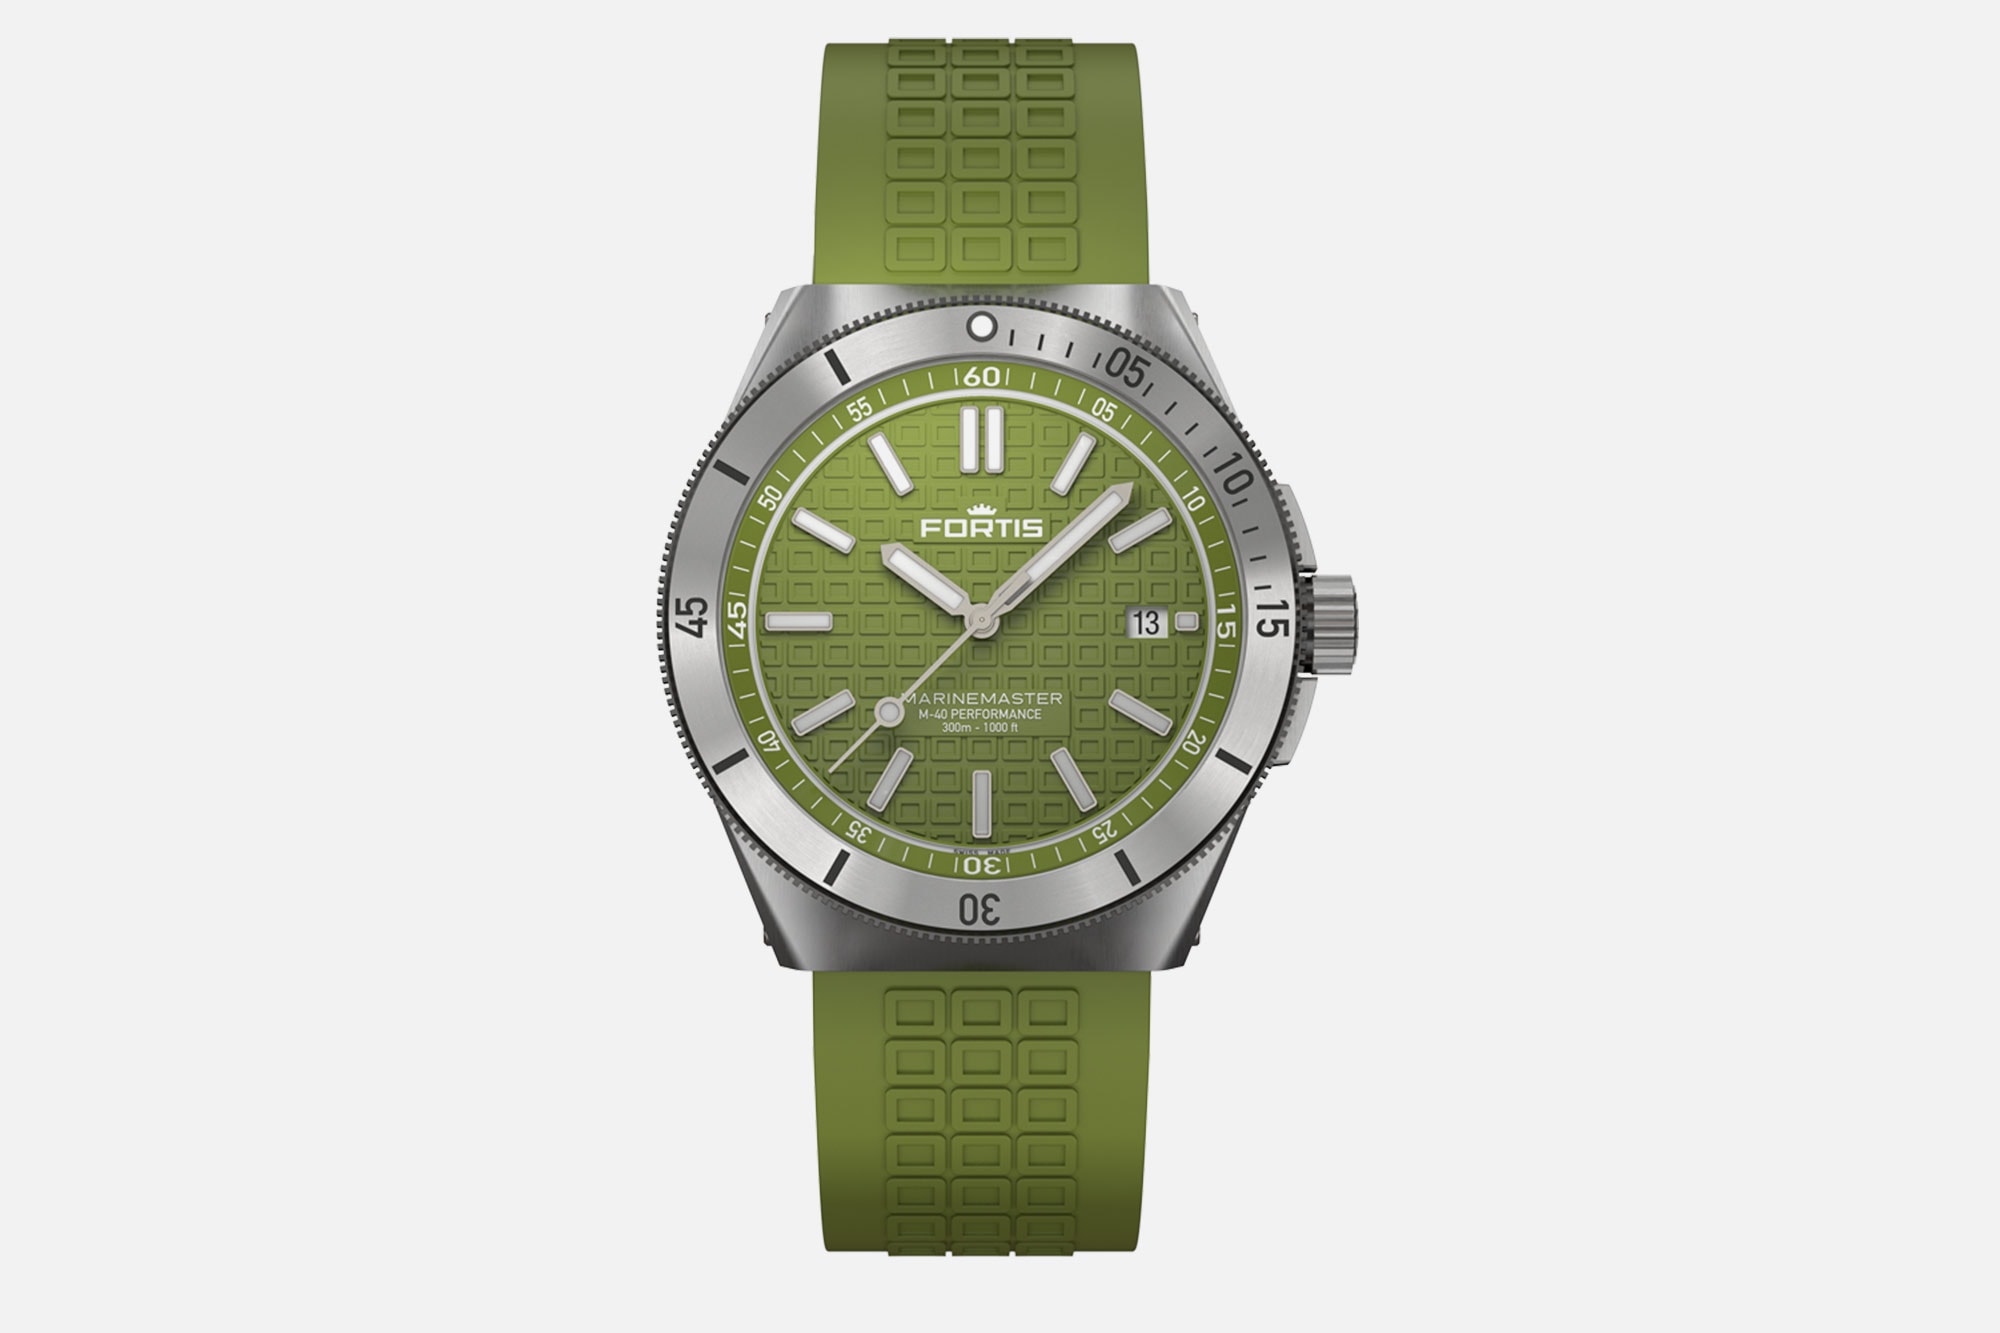 Fortis Introduces the Marinemaster Line, a Watch Made for Life Outdoors